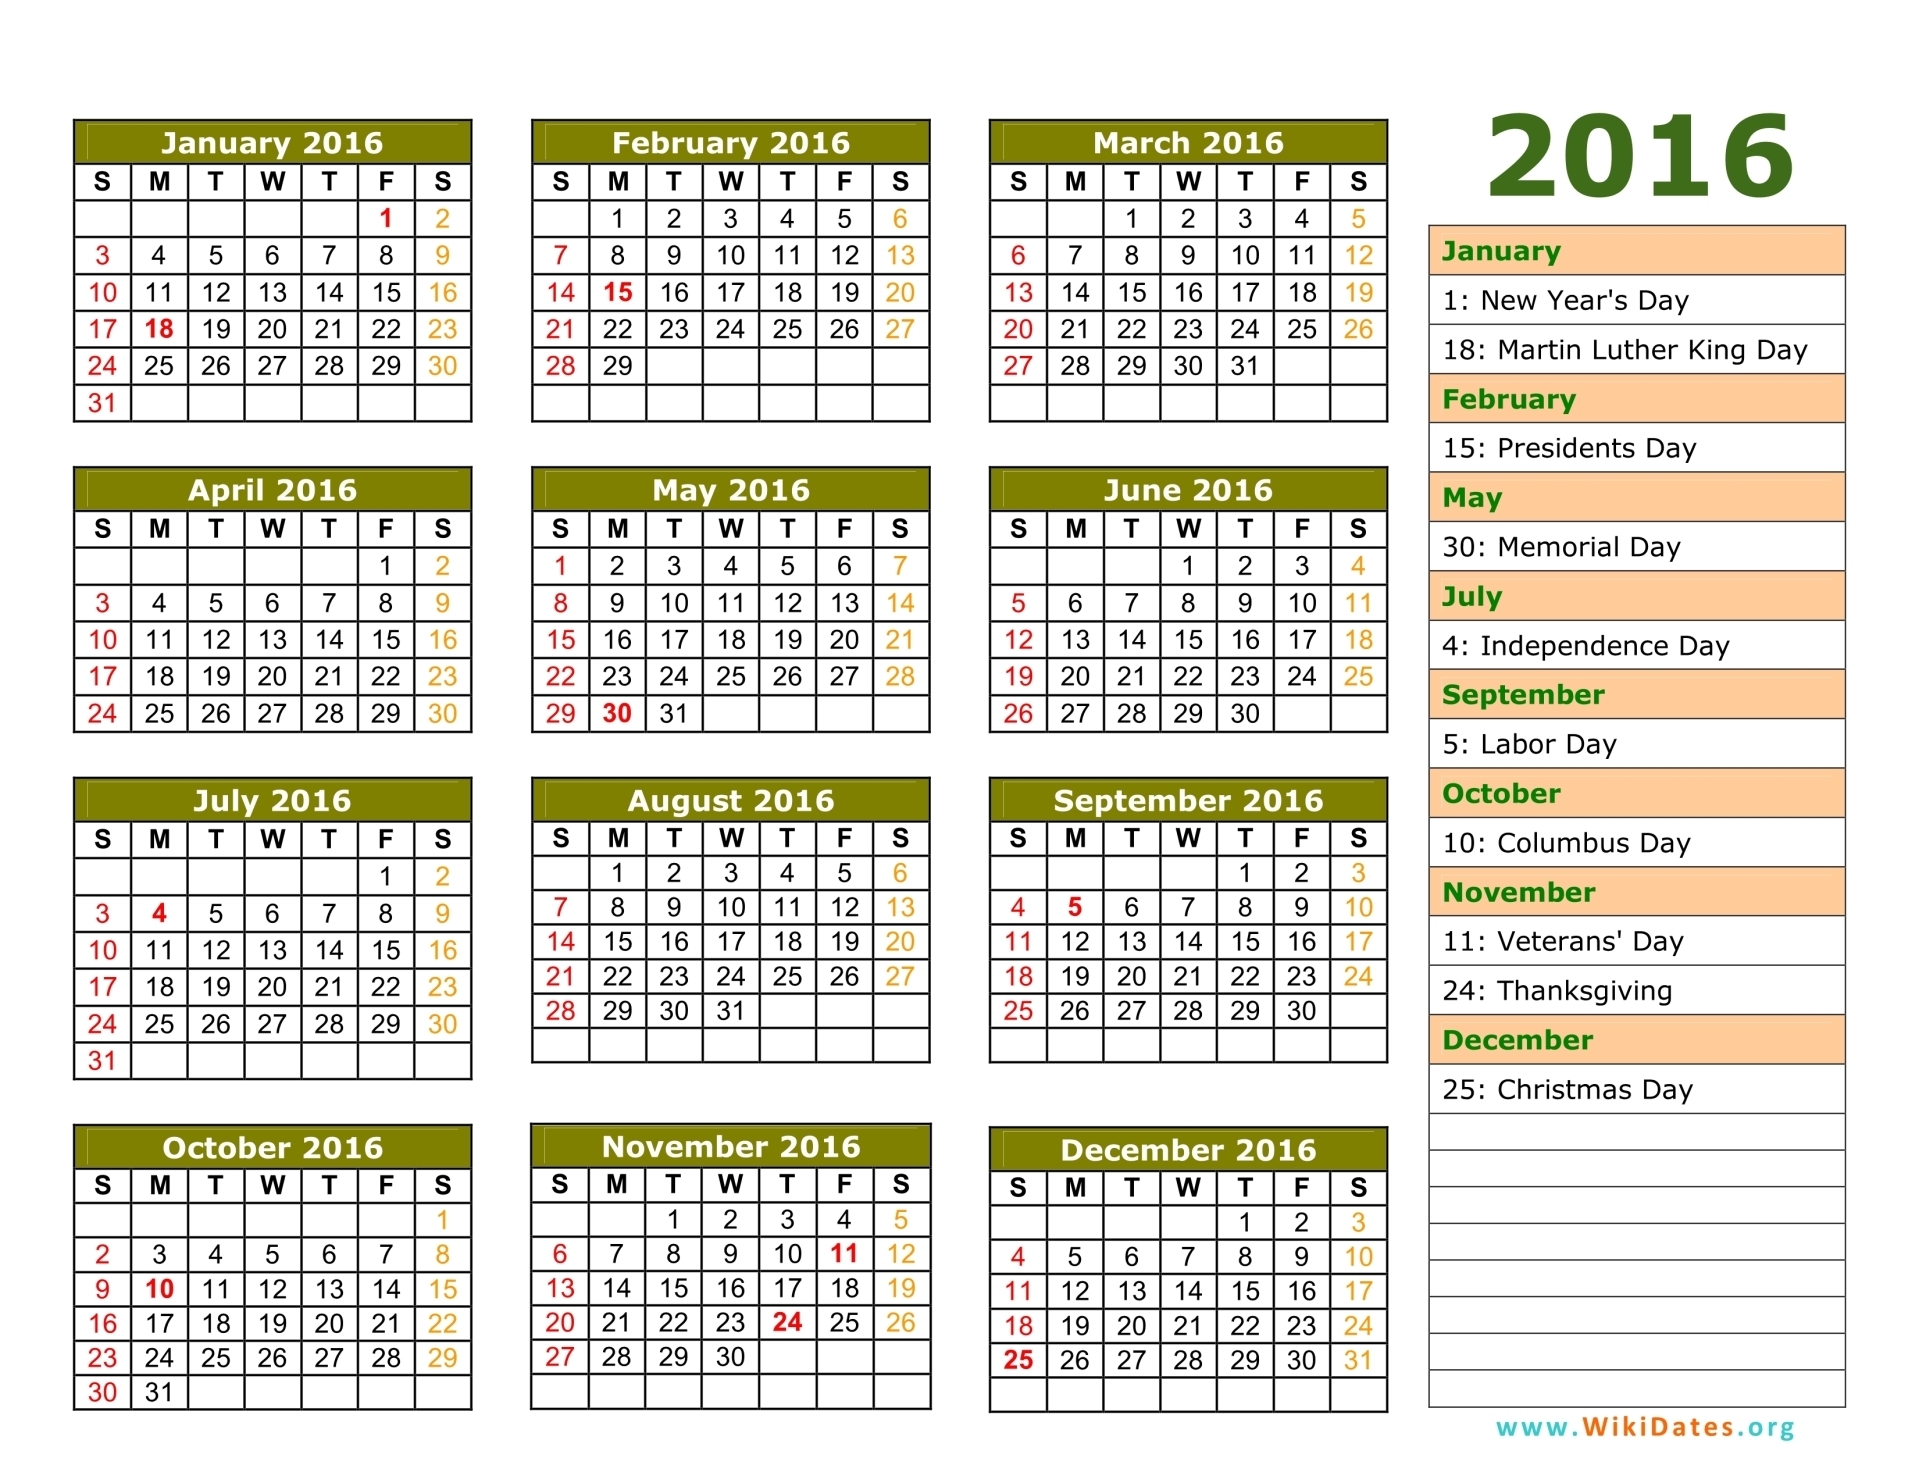 January Calendar 2016 Template from www.wikidates.org